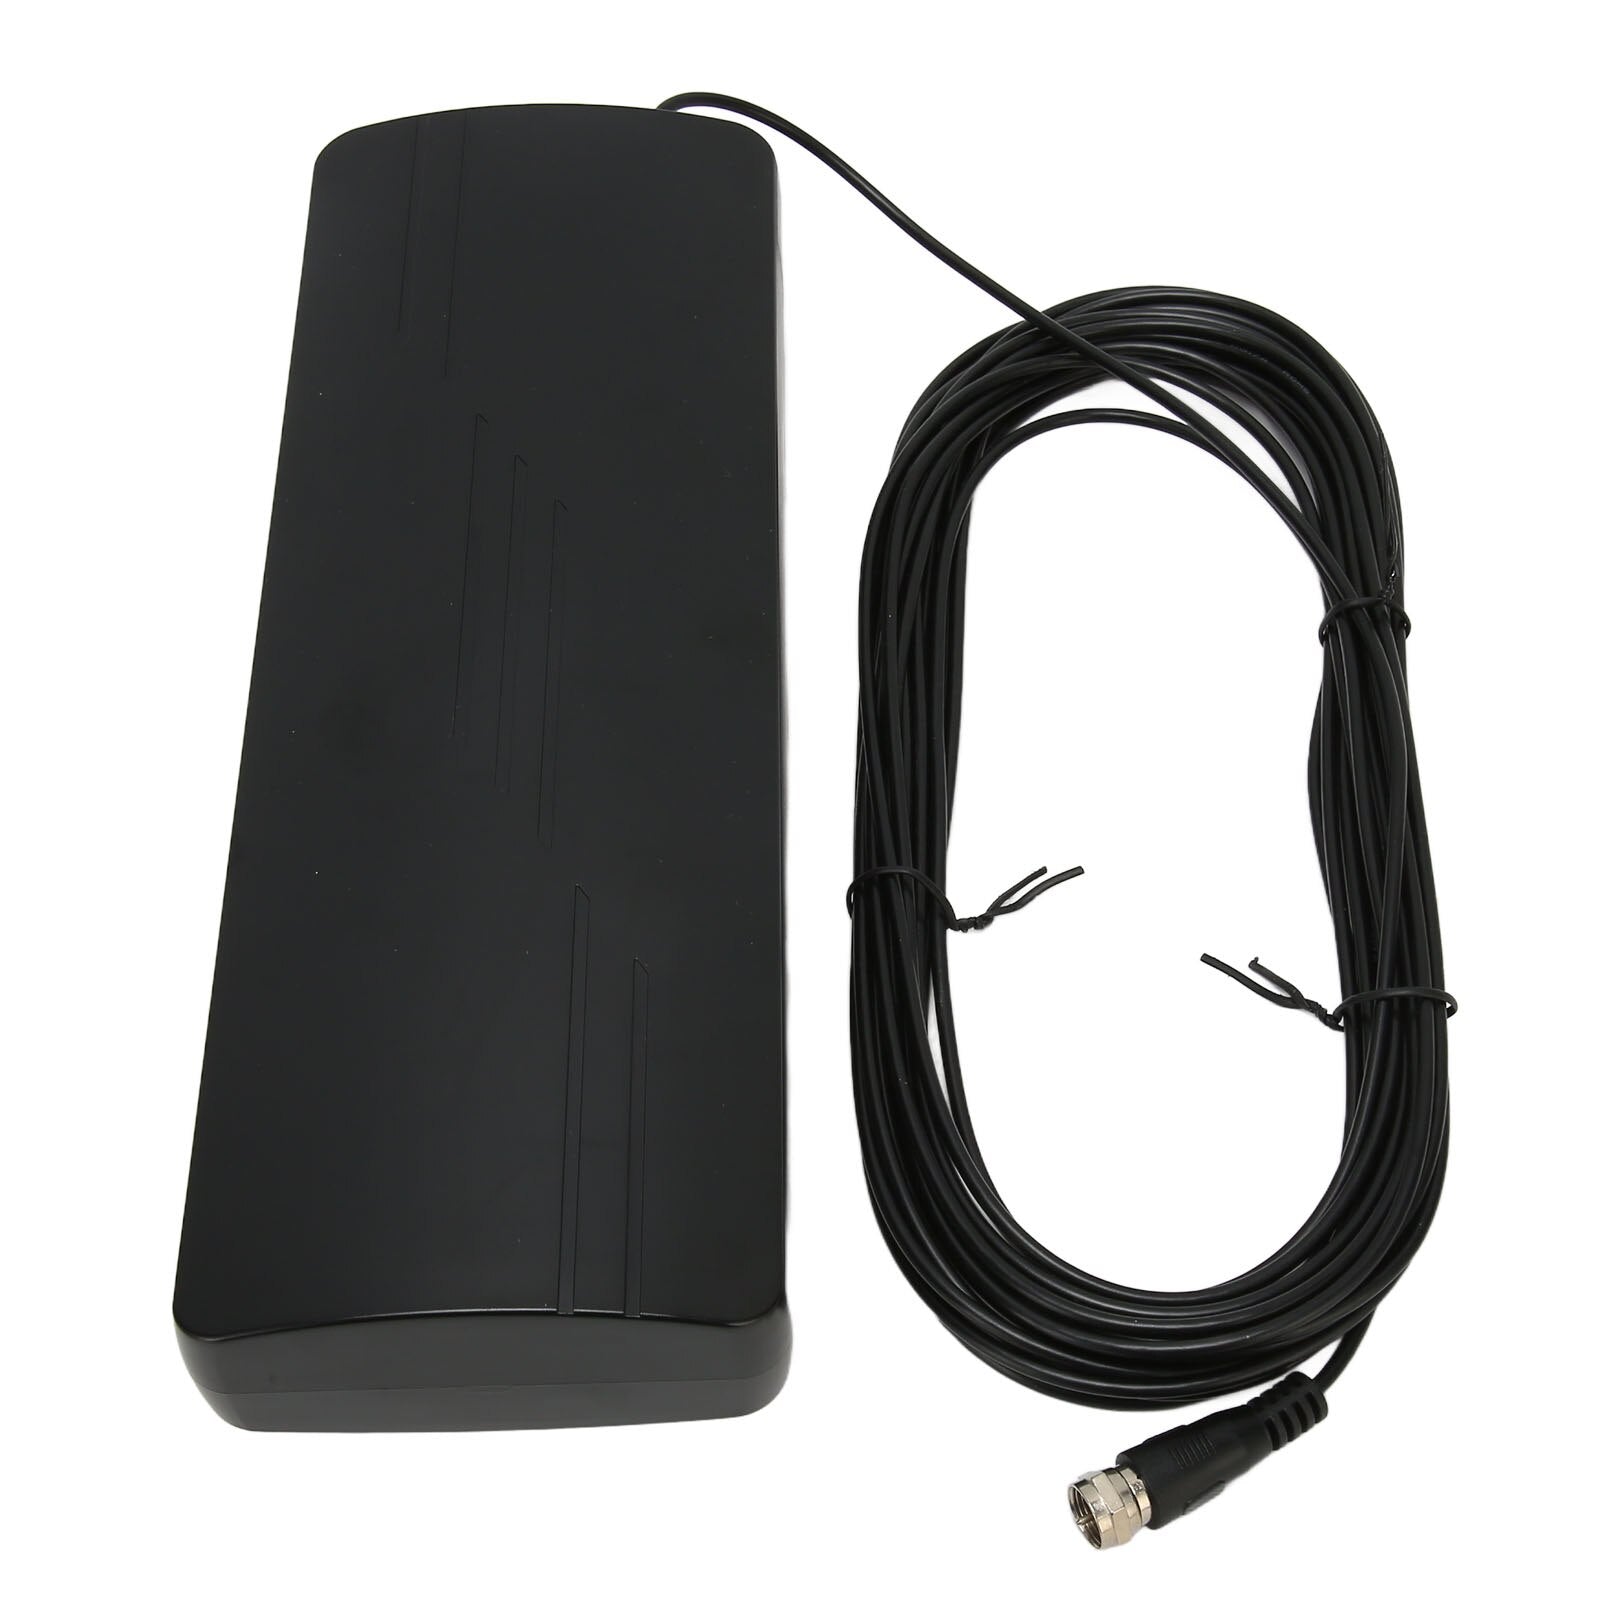 Digital TV Antenna 270 Miles Indoor Outdoor HDTV Antenna with Amplified Signal Receiver Fit for 4K HD Local Channels